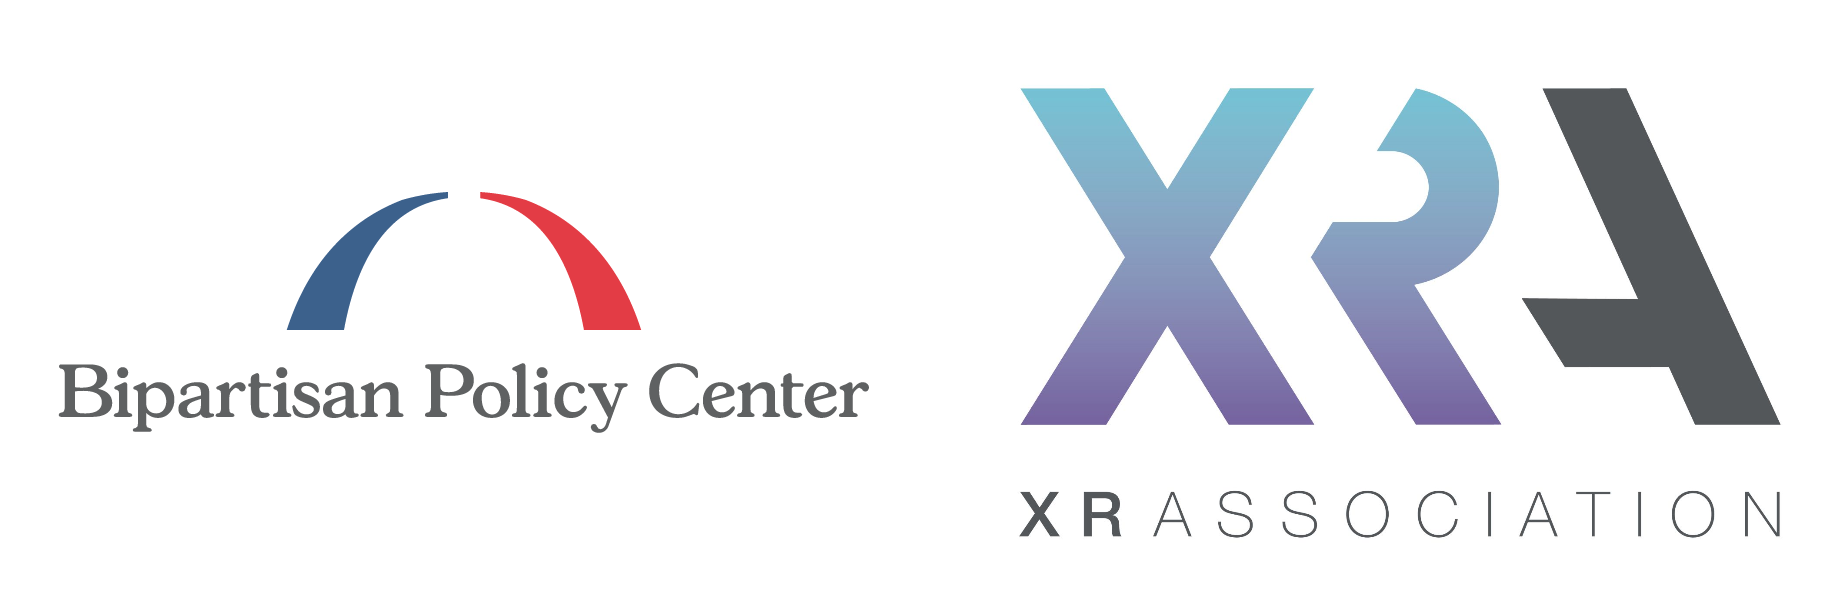 THE XR ASSOCIATION AND BIPARTISAN POLICY CENTER RELEASE REPORT ON IMMERSIVE TECHNOLOGY